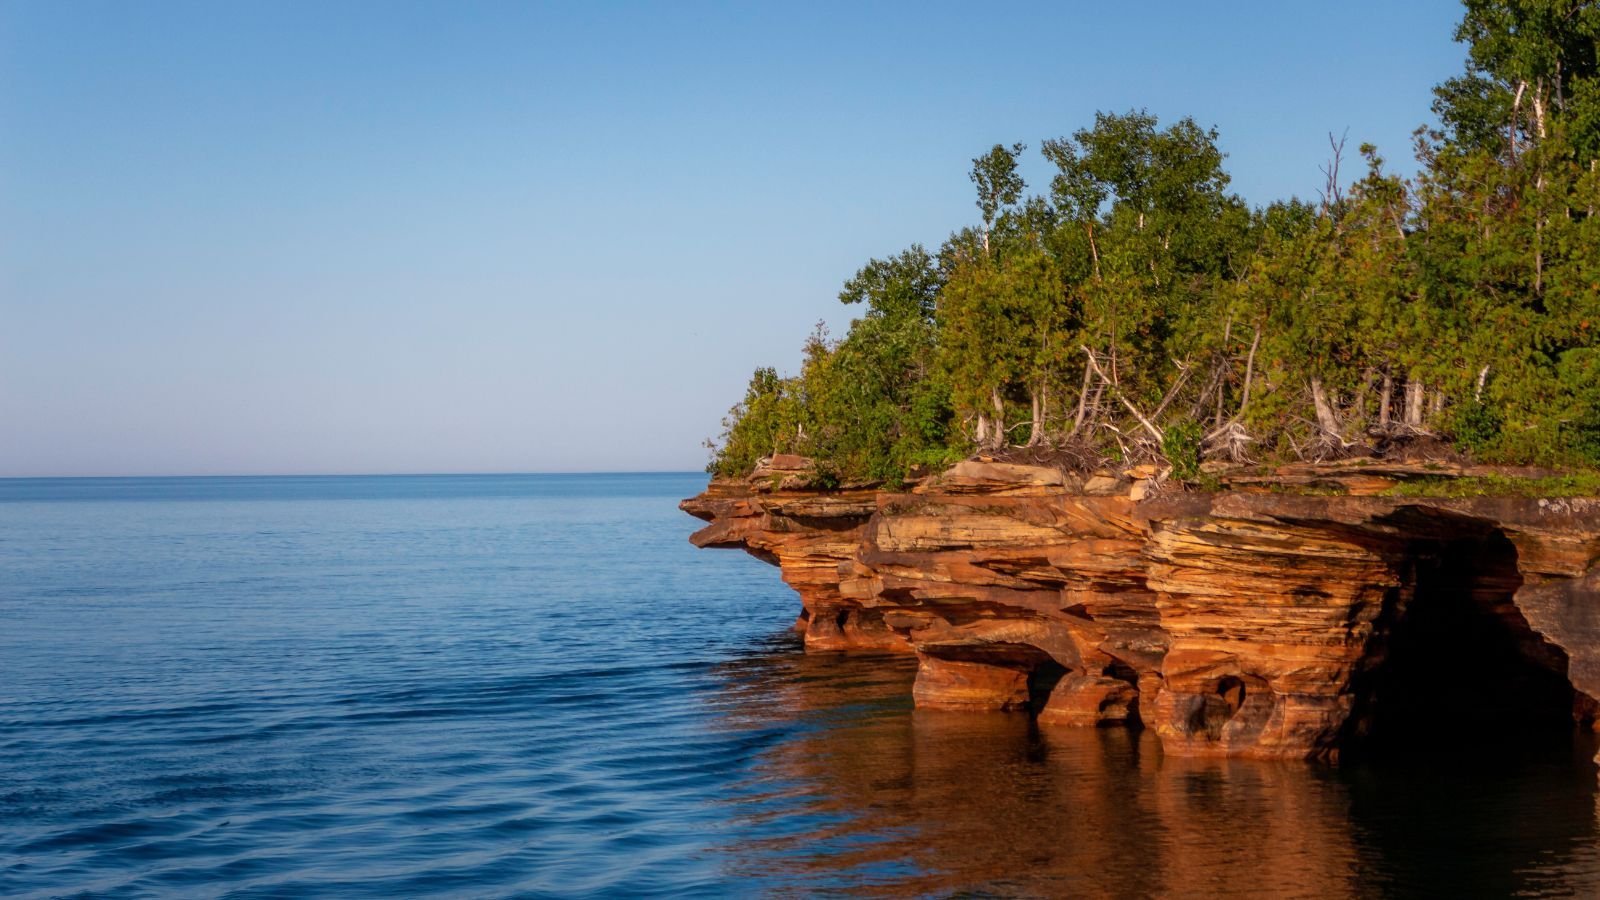 <p>Apostle Islands National Lakeshore in Wisconsin is a great place for people who love outdoor activities regardless of the season. In the warmer months, you can go kayaking through sandstone cliffs shaped by the waves. In the winter, you can walk across the frozen lake to see the beautiful ice caves.</p>